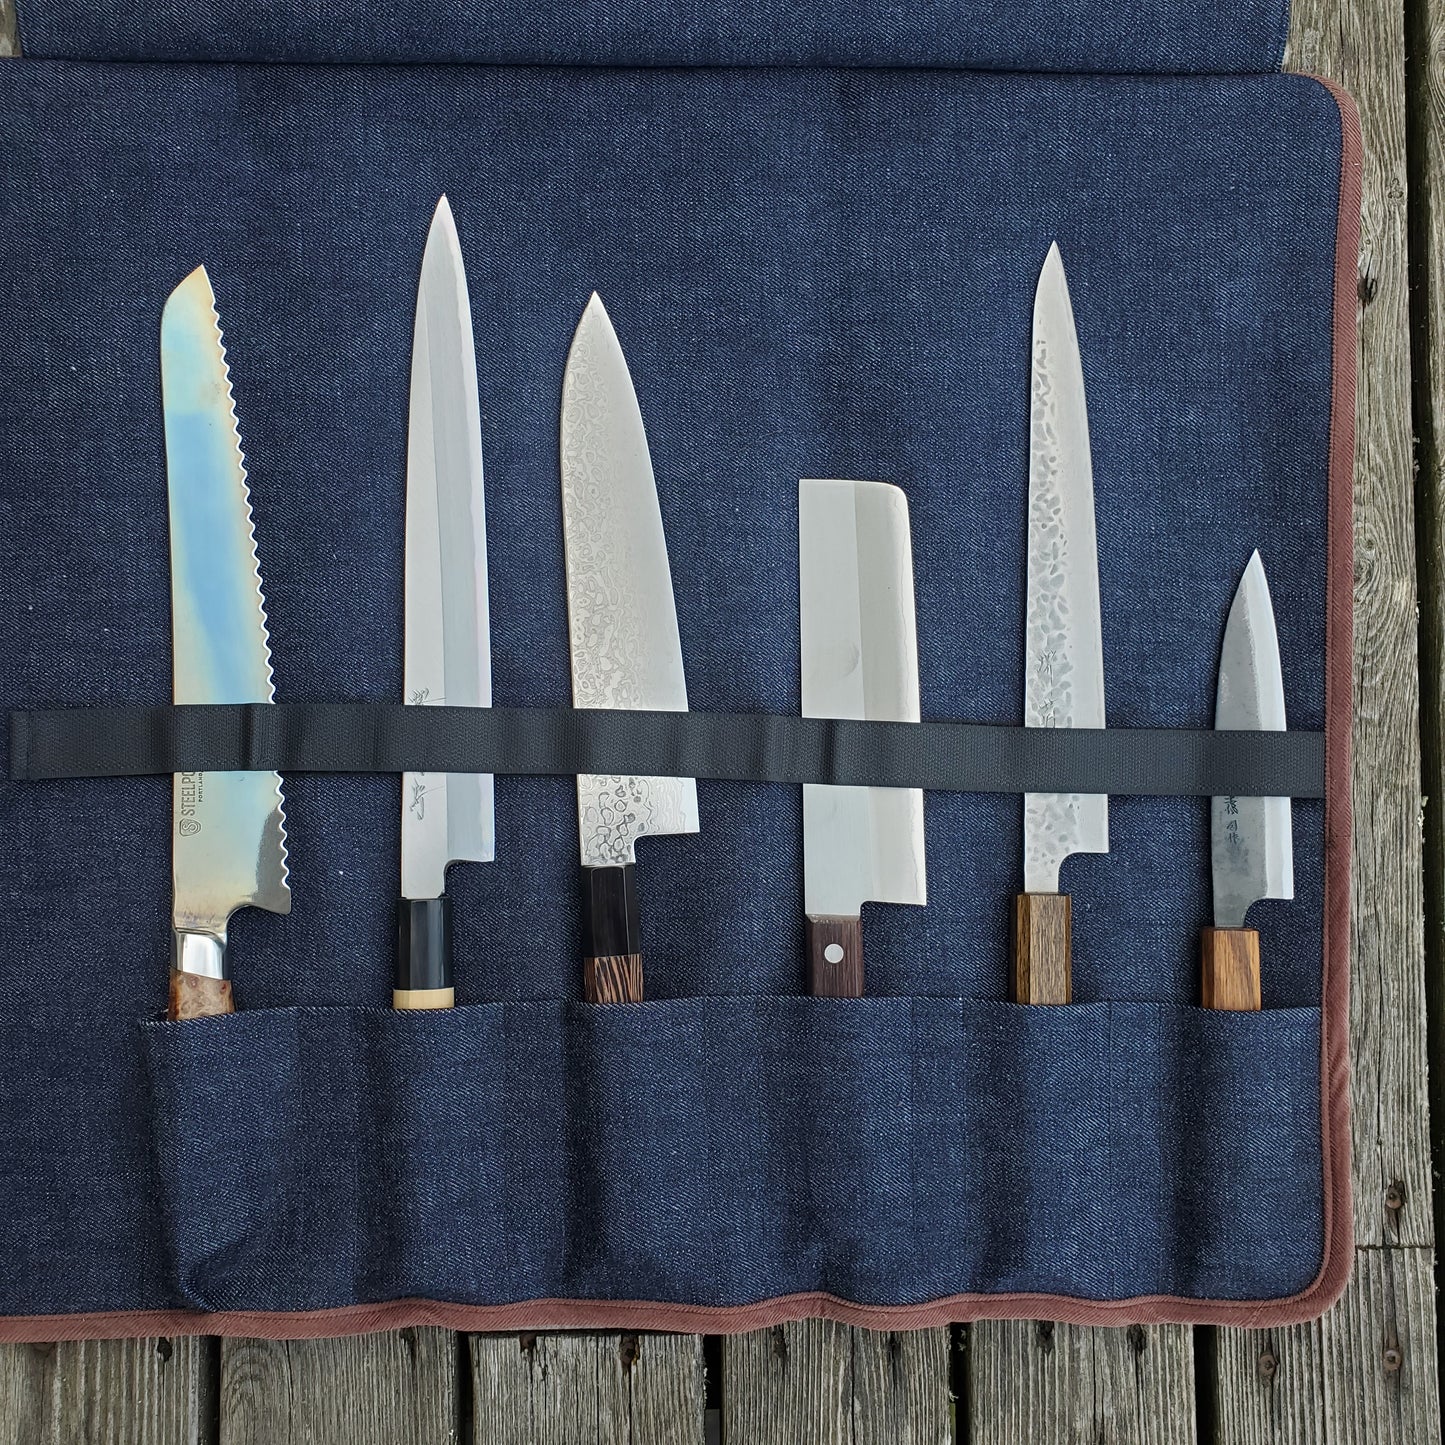 Carbon Steel Chef Knife Set With Rolling Leather Bag Blue